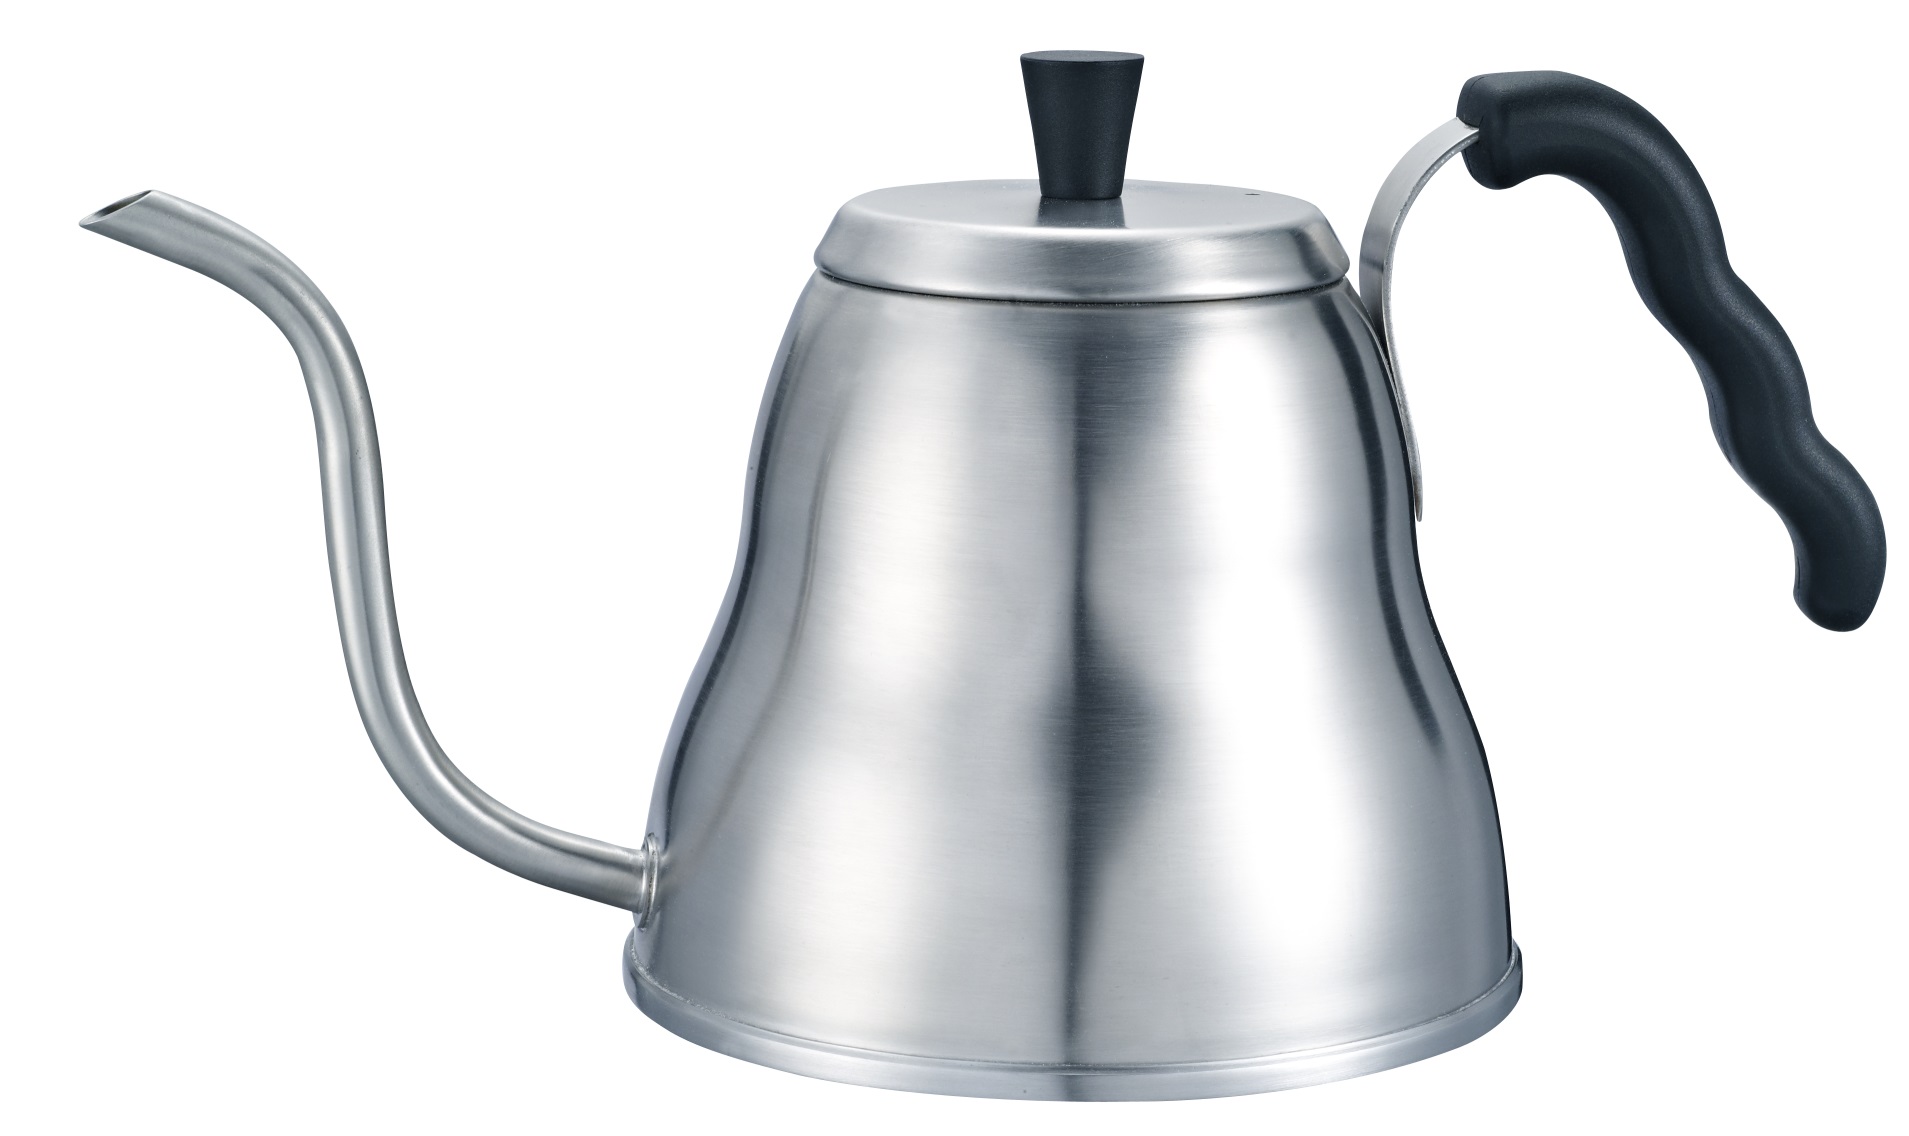 Stainless Steel Pour Over Drip Coffee and Tea Kettle Pot with Extra Thin Precision Gooseneck Spout